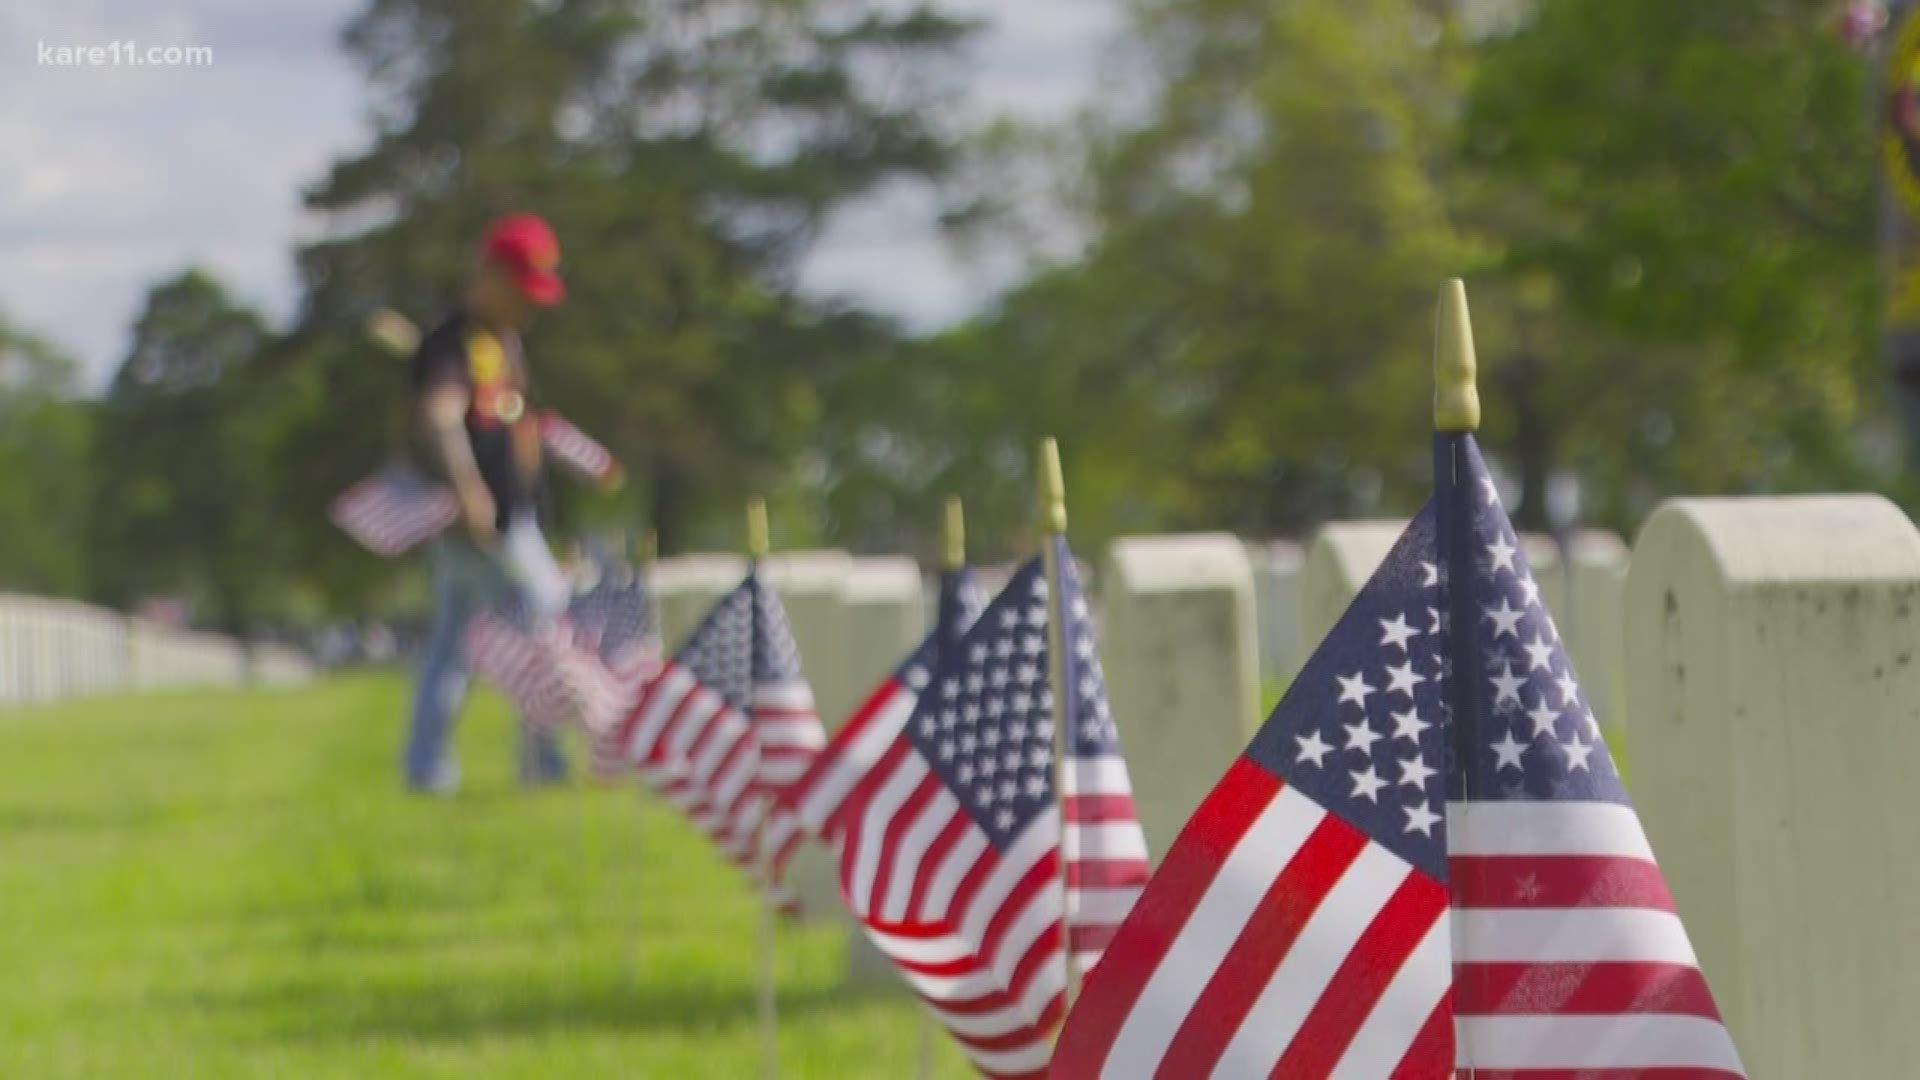 It's the final resting place for thousands of fallen heroes